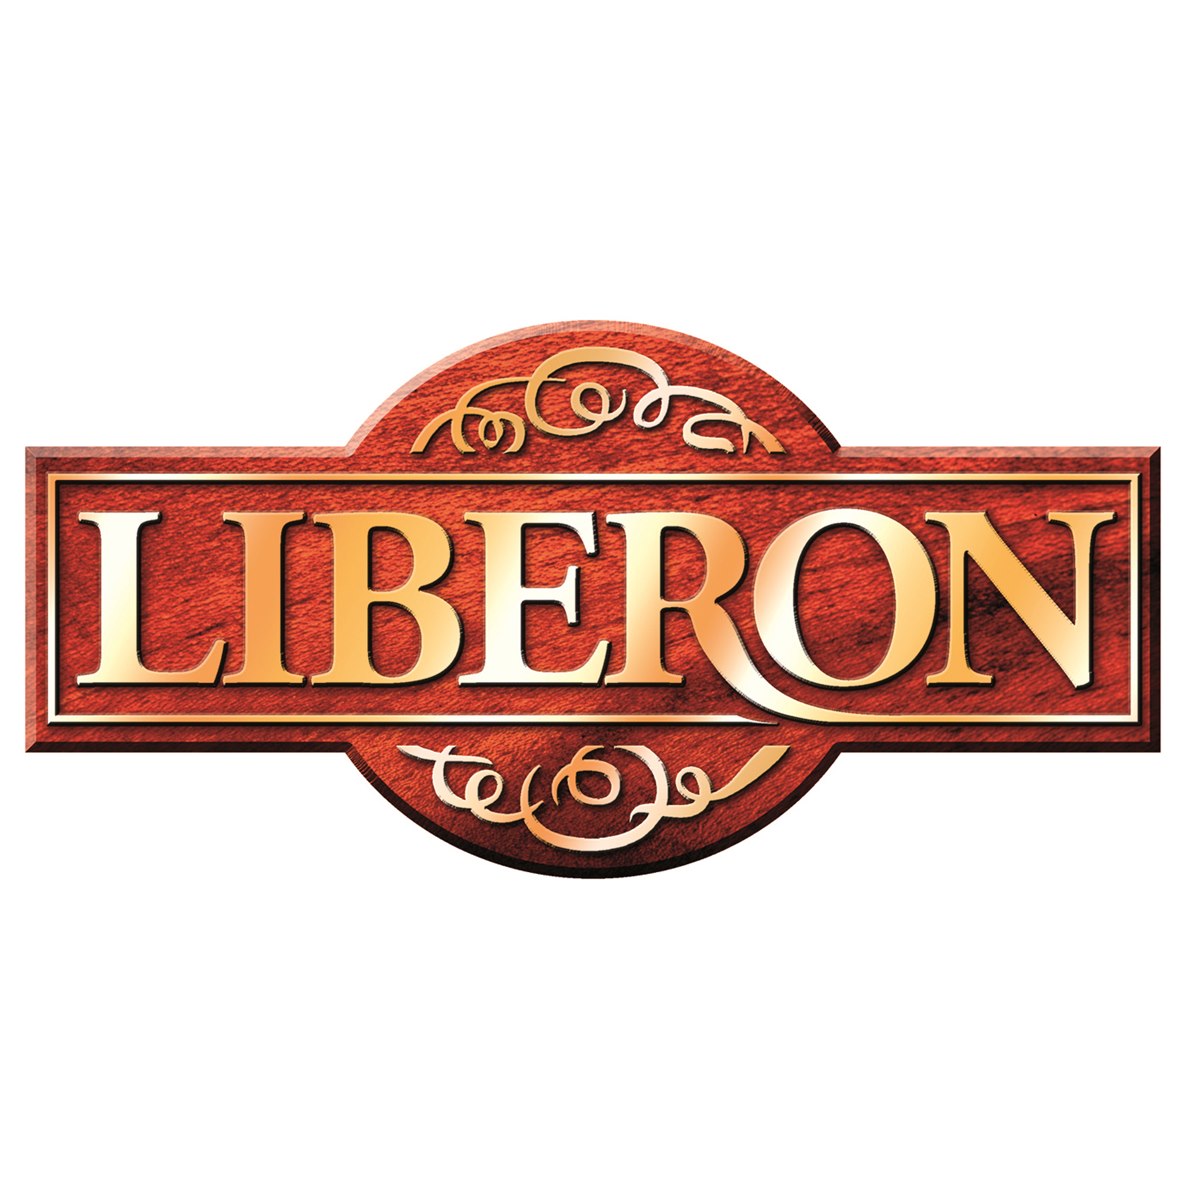 Where to buy Liberon Floor Cleaners